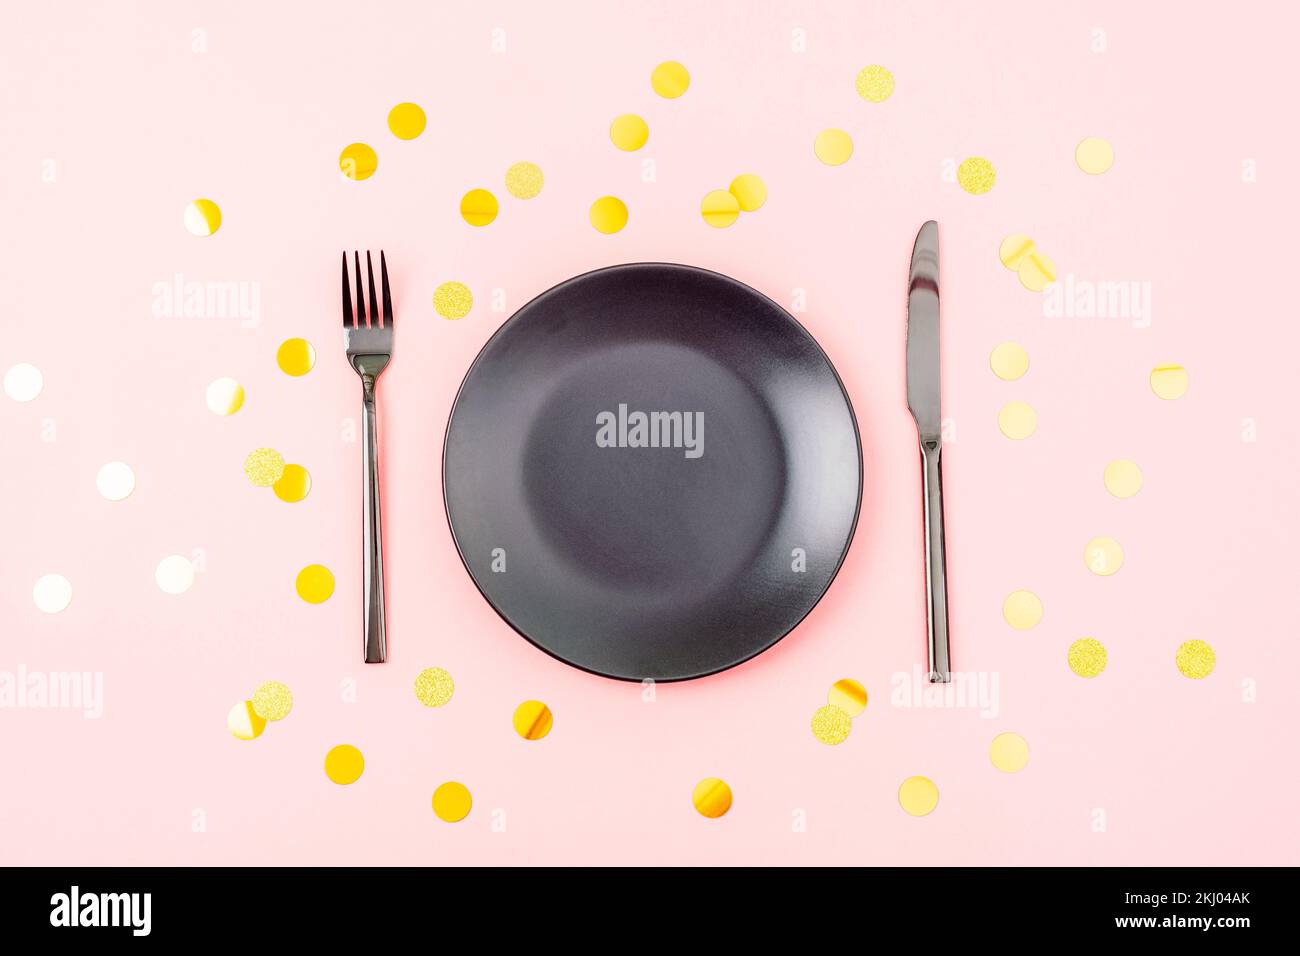 Stylish table setting with black plate, cutlery on pink background with golden confetti. Christmas, birthday, holiday concept. Top view, flat lay. Stock Photo